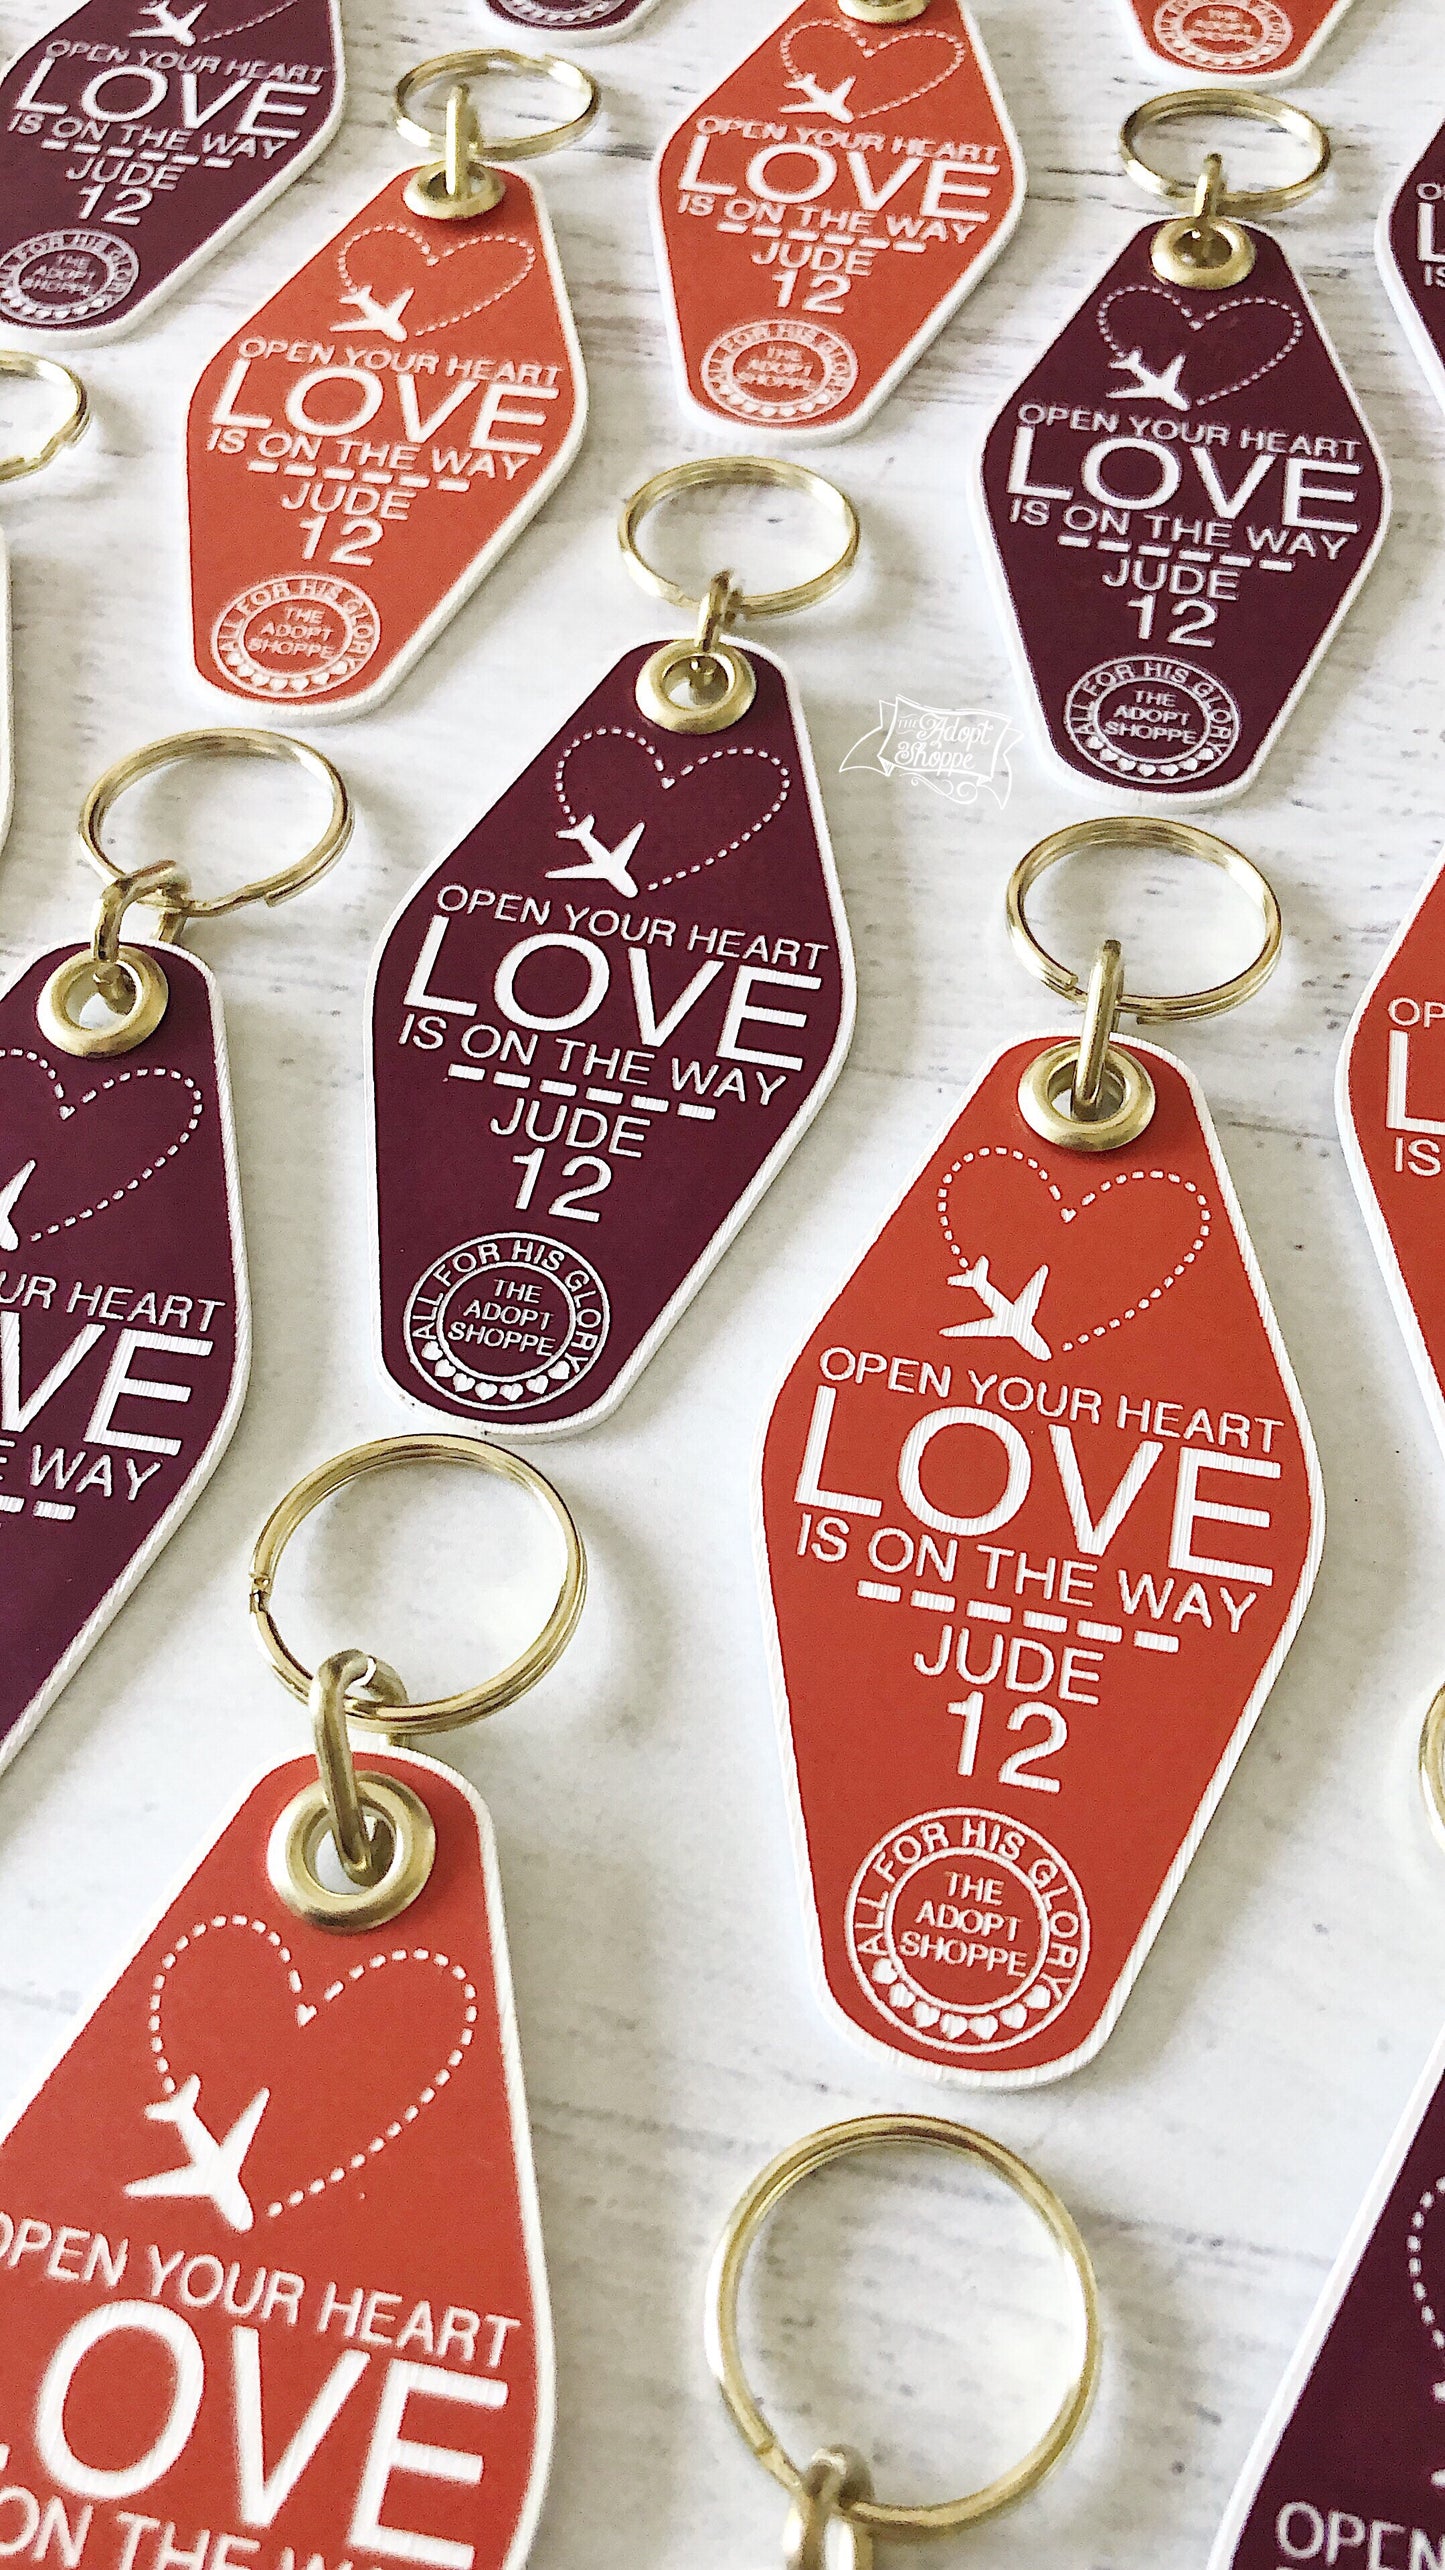 open your heart LOVE is on the way orange maroon white retro motel key tag fob